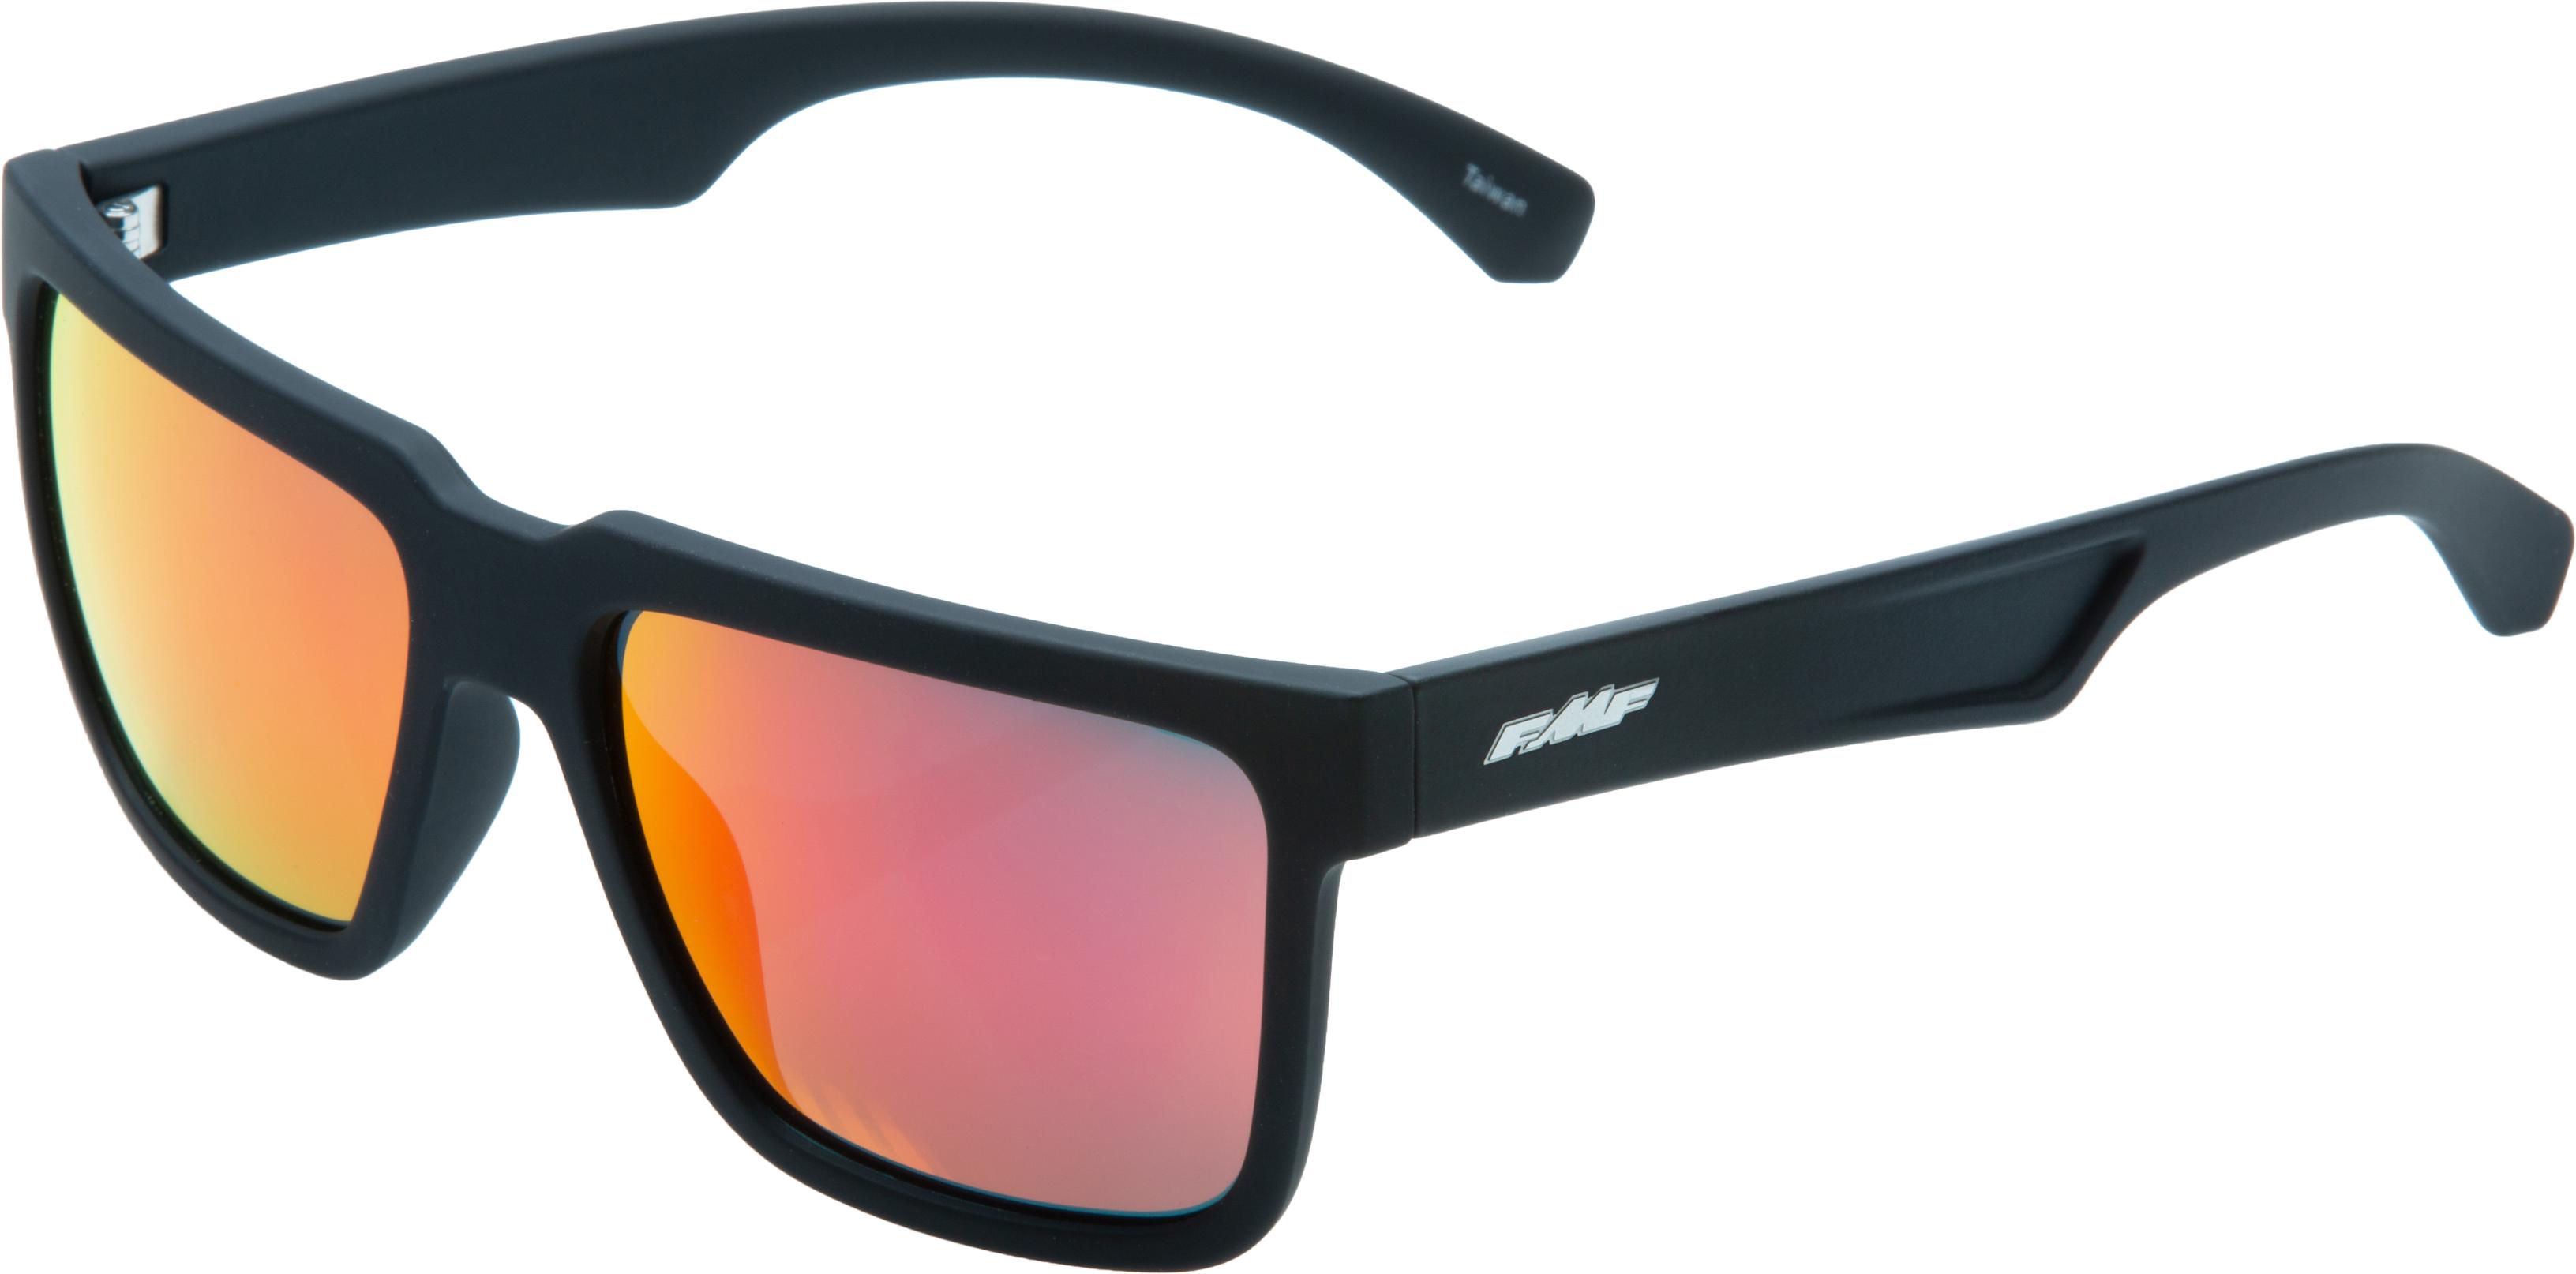 Fmf Vision - The Don Sunglass - 841269182720